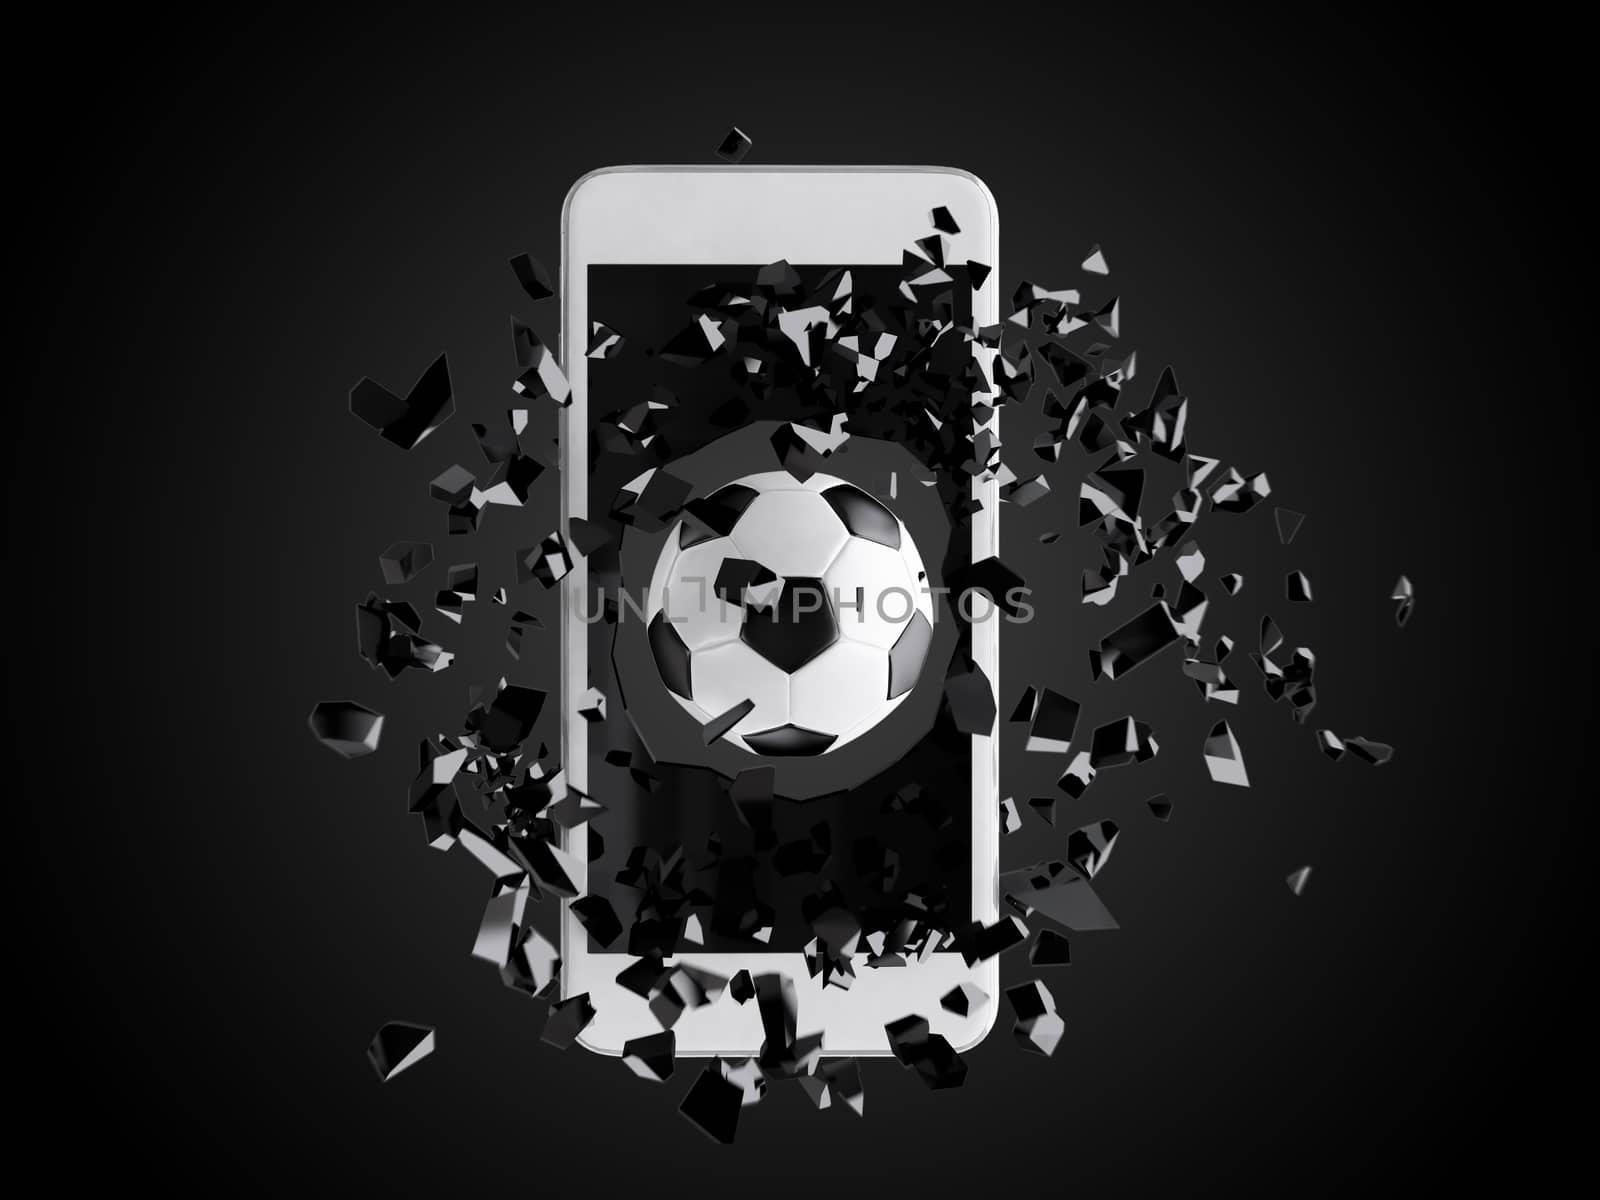 soccer burst out of the smartphone by teerawit